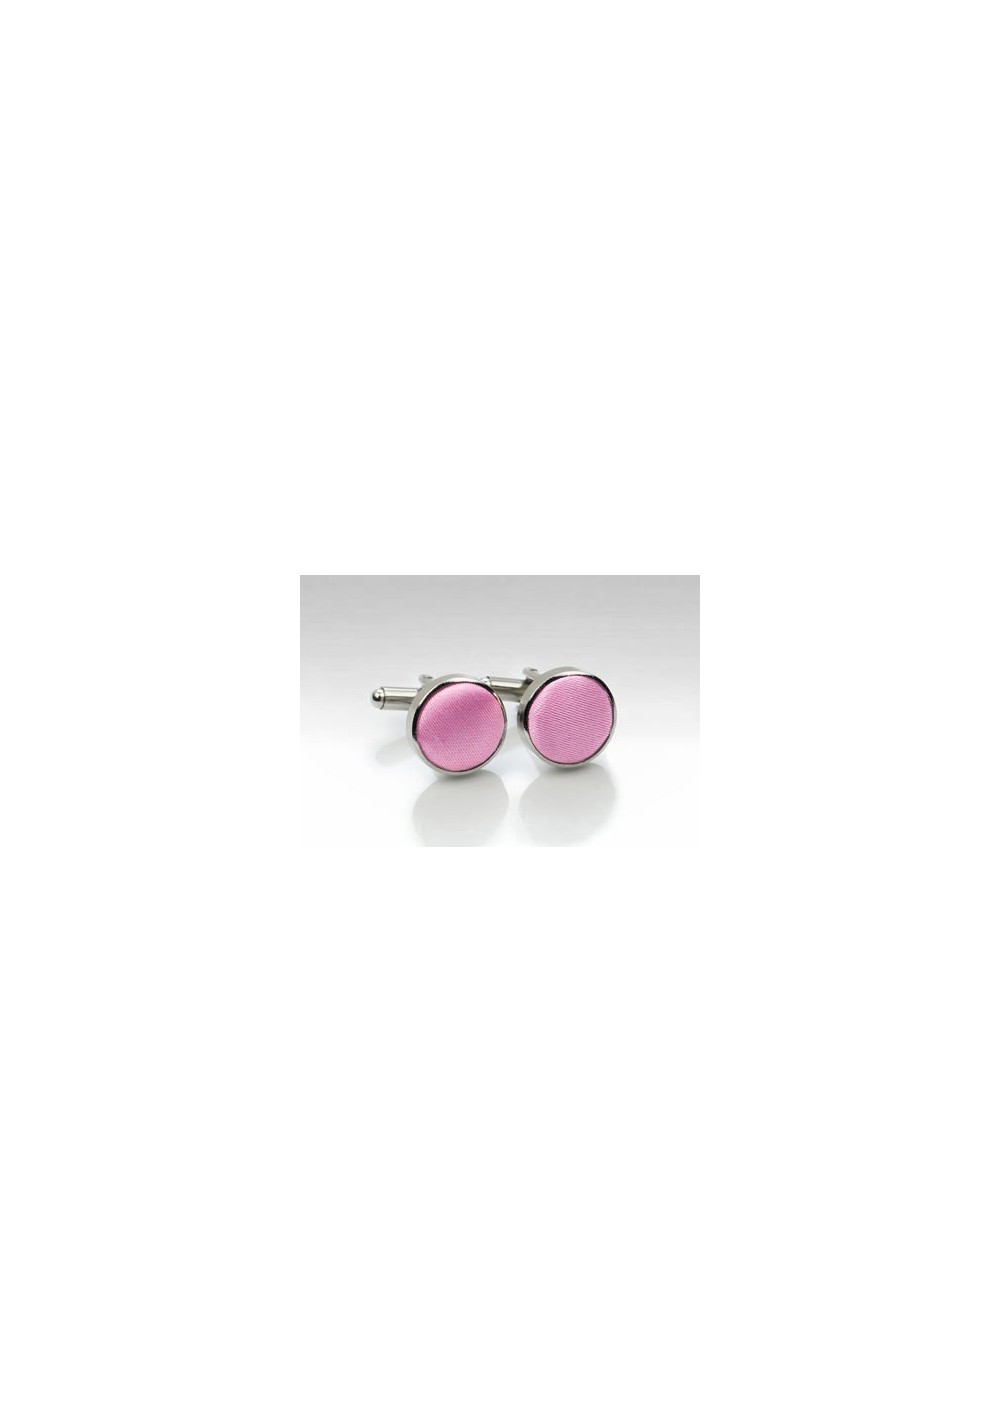 Pink Fabric Covered Cufflinks